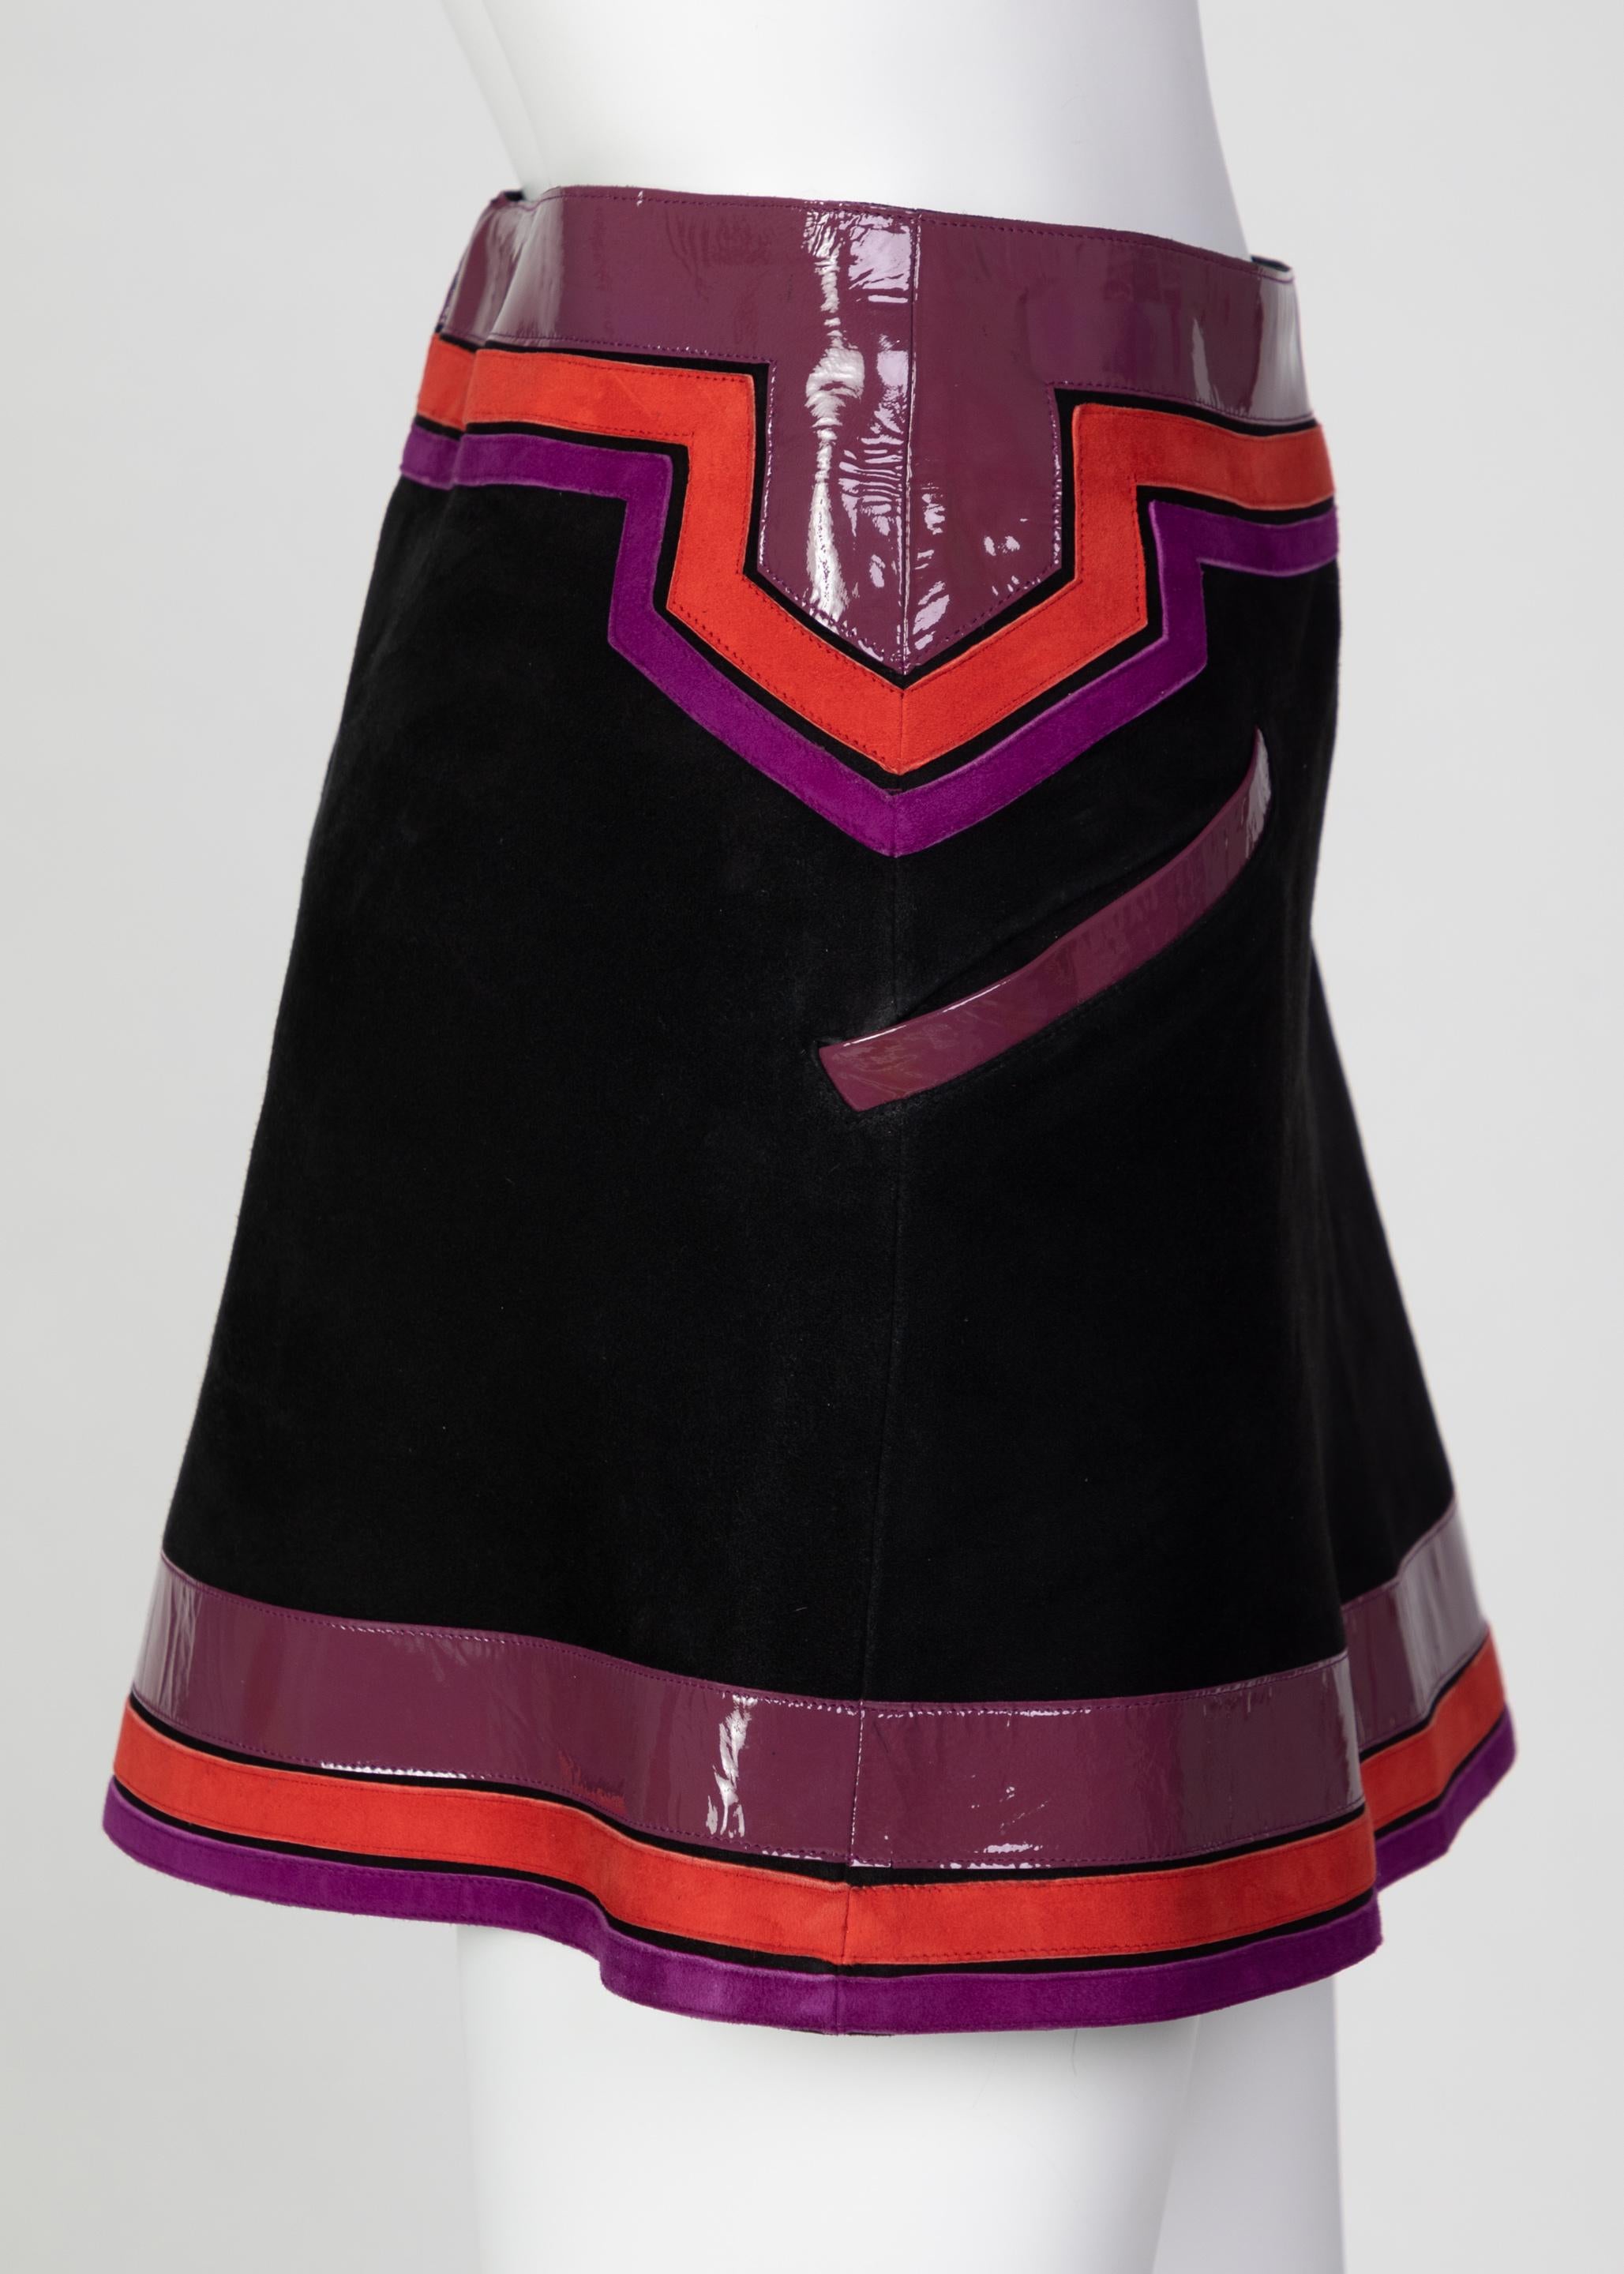 Women's Gucci Black Suede Purple Pink Patent Leather Mod Mini Skirt Runway, 2007 For Sale